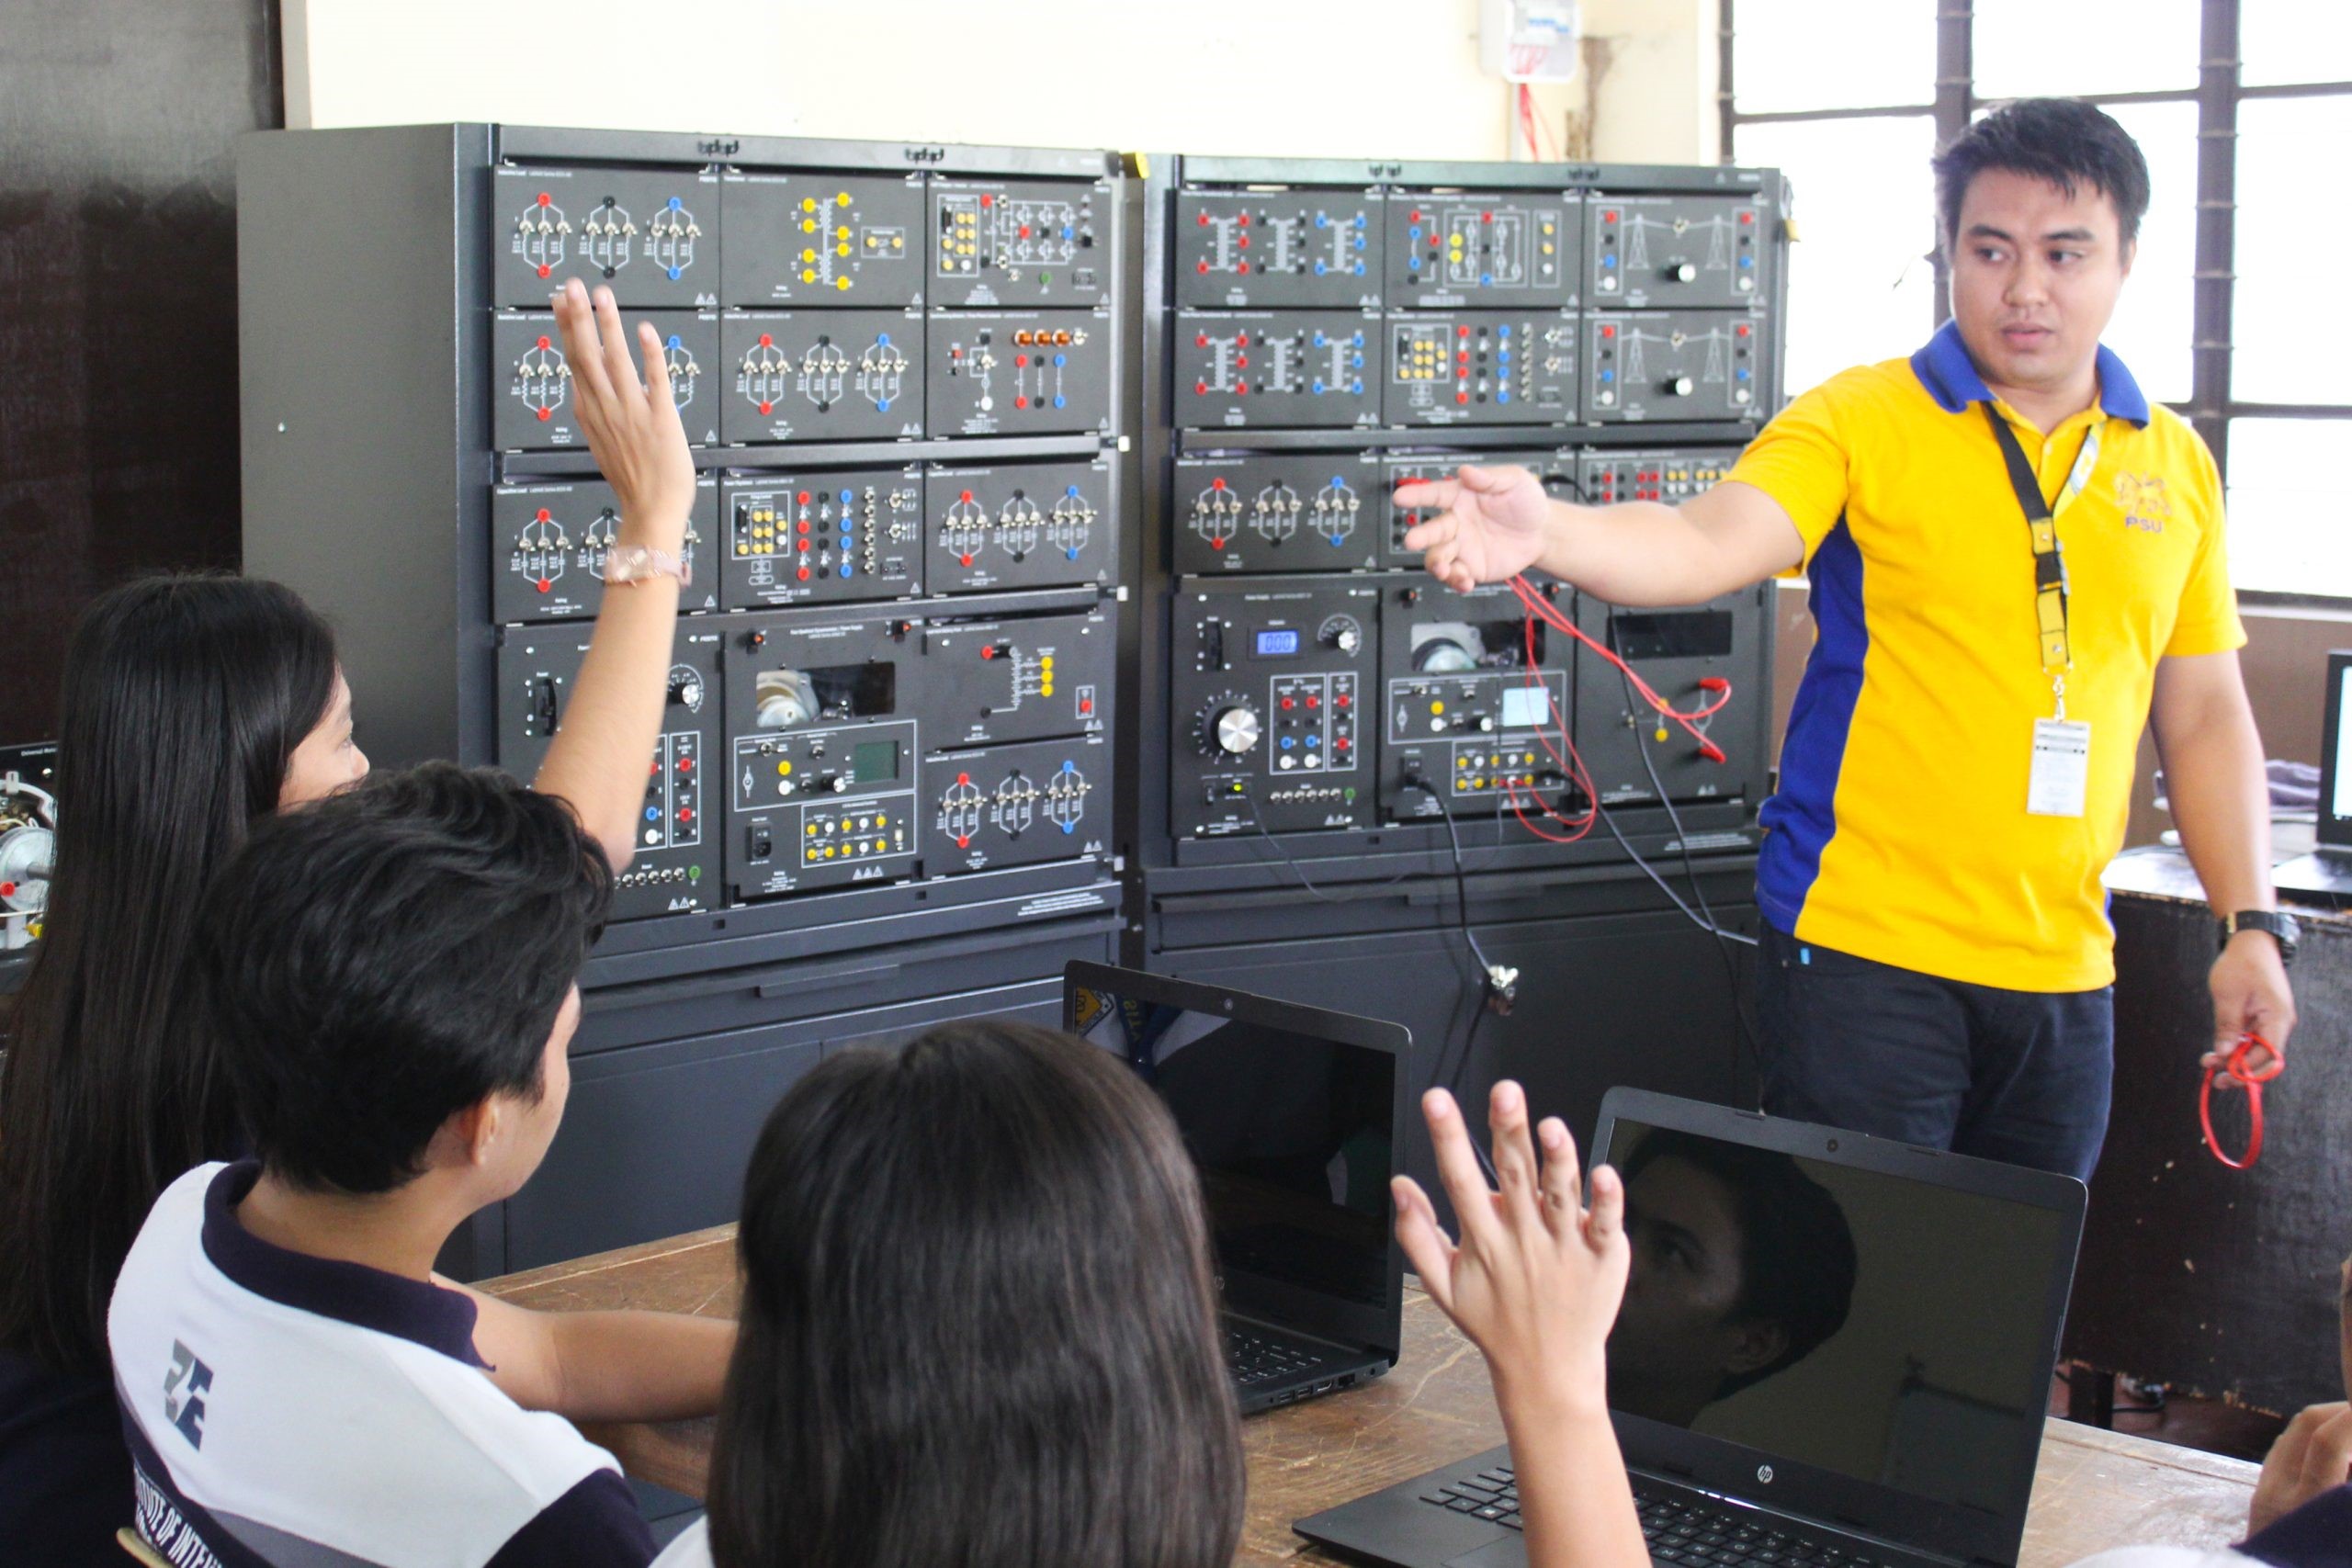 Engr. Harry Errasquin was teaching the subject AC Apparatus using the equipment Electromechanical System to his fourth-year Electrical Engineering class, and asked a volunteer student to perform the activity experiment. Miss Hillary Joy Yambao presented as a volunteer.